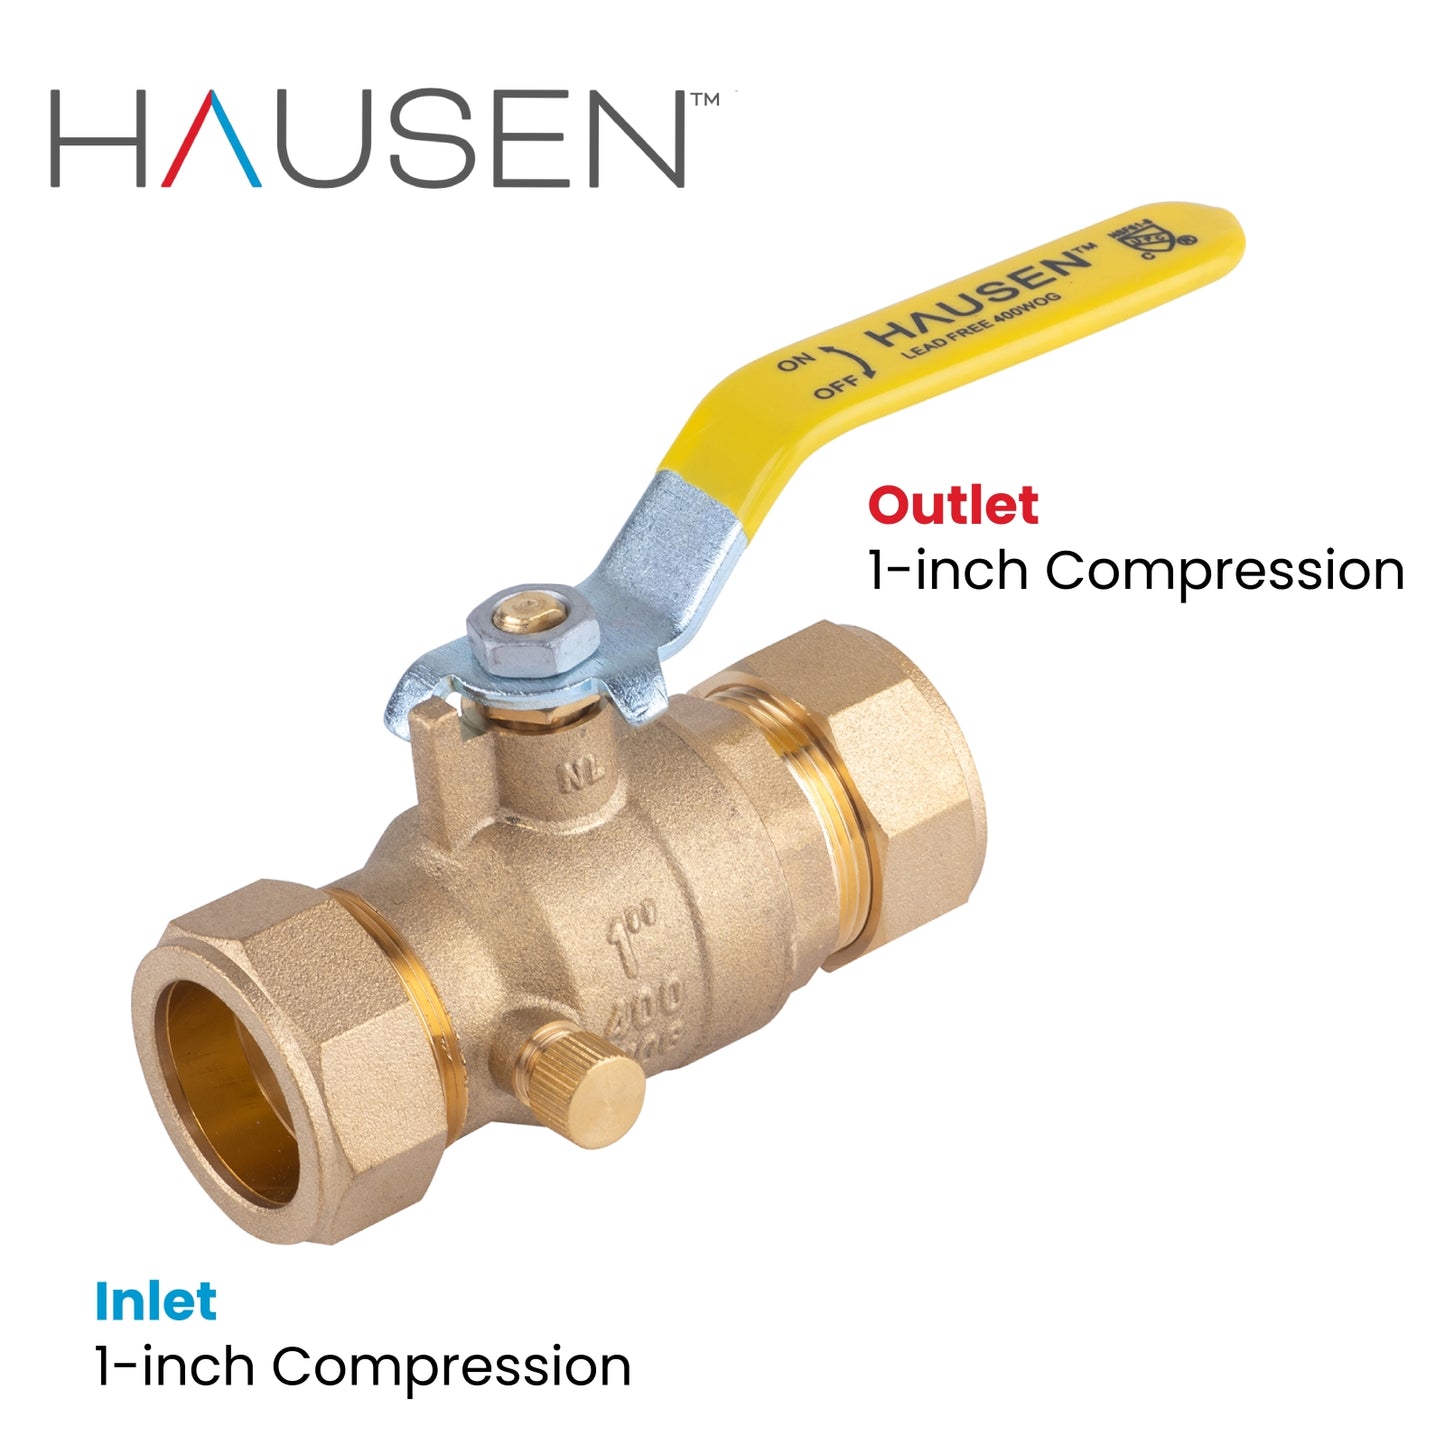 Hausen 1-inch Compression Standard Port Brass Ball Valve with Drain; Lead Free Forged Brass; Blowout Resistant Stem; For Use in Potable Water, Oil and Gas Distribution Systems, 5-Pack